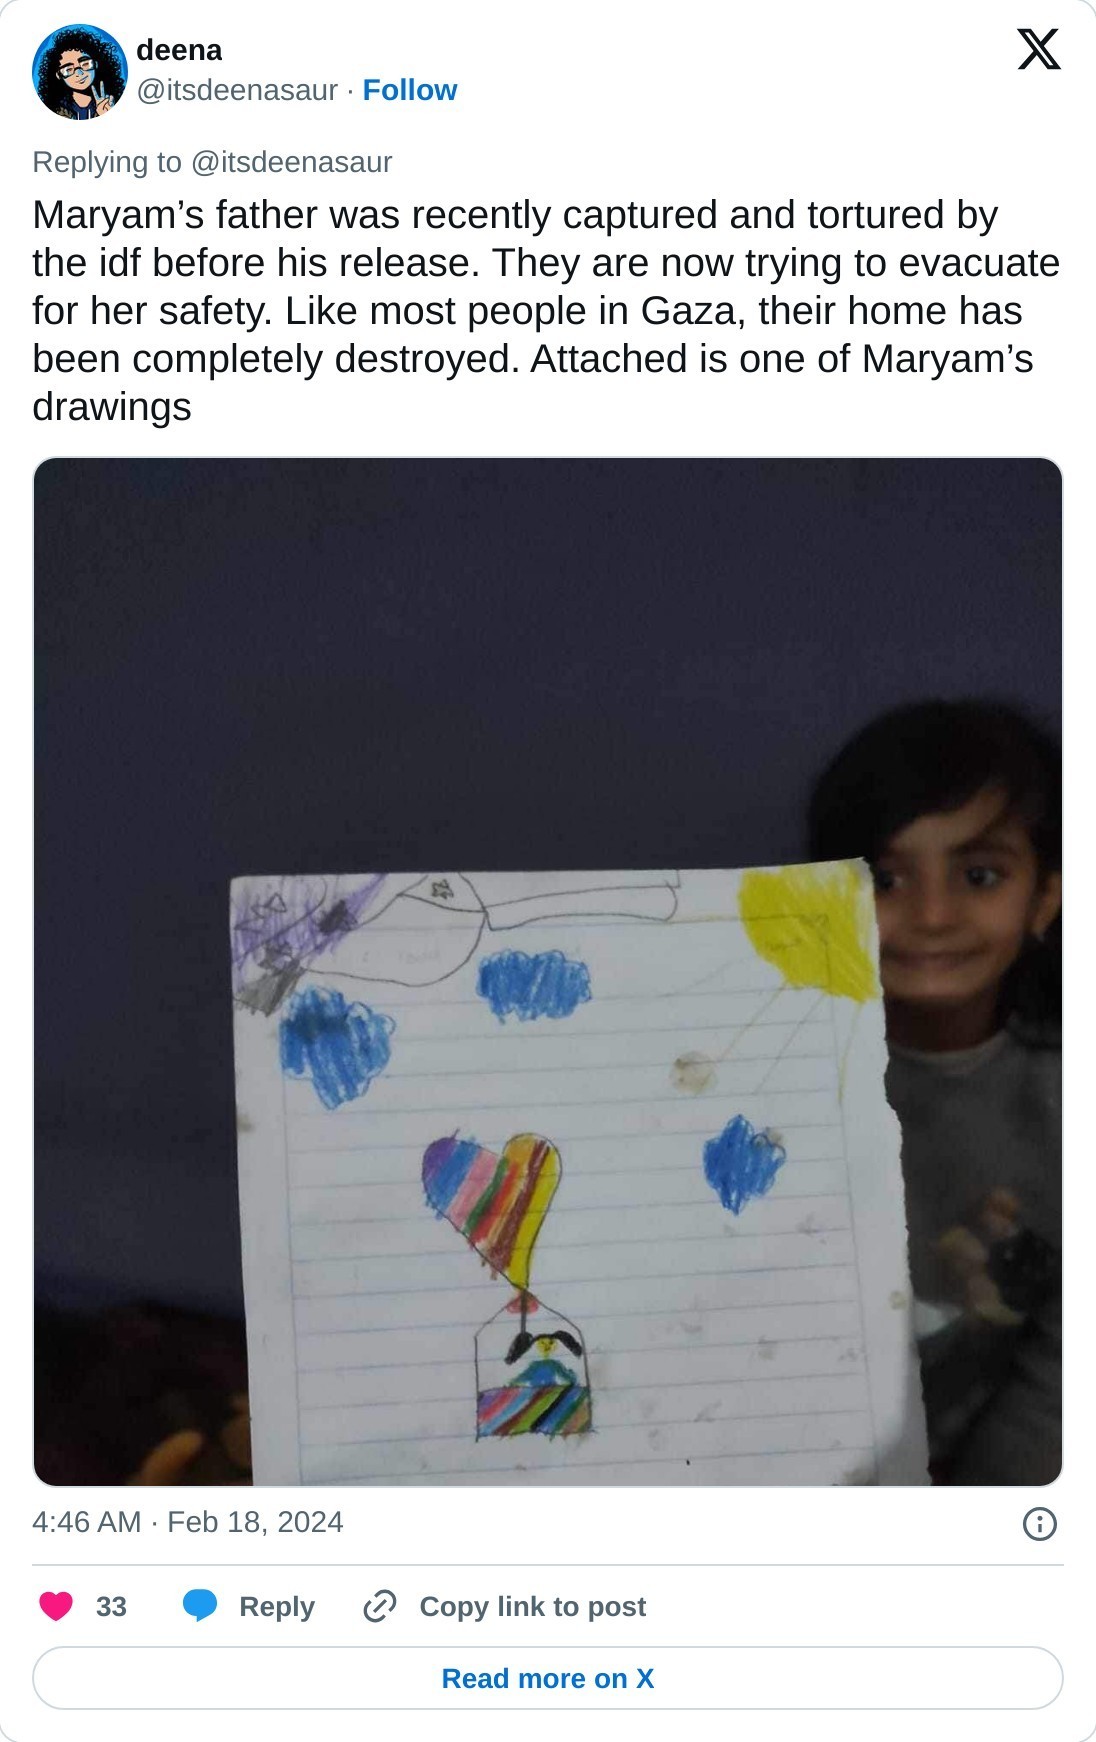 Maryam’s father was recently captured and tortured by the idf before his release. They are now trying to evacuate for her safety. Like most people in Gaza, their home has been completely destroyed. Attached is one of Maryam’s drawings pic.twitter.com/BZV6YnYD0C  — deena (@itsdeenasaur) February 18, 2024